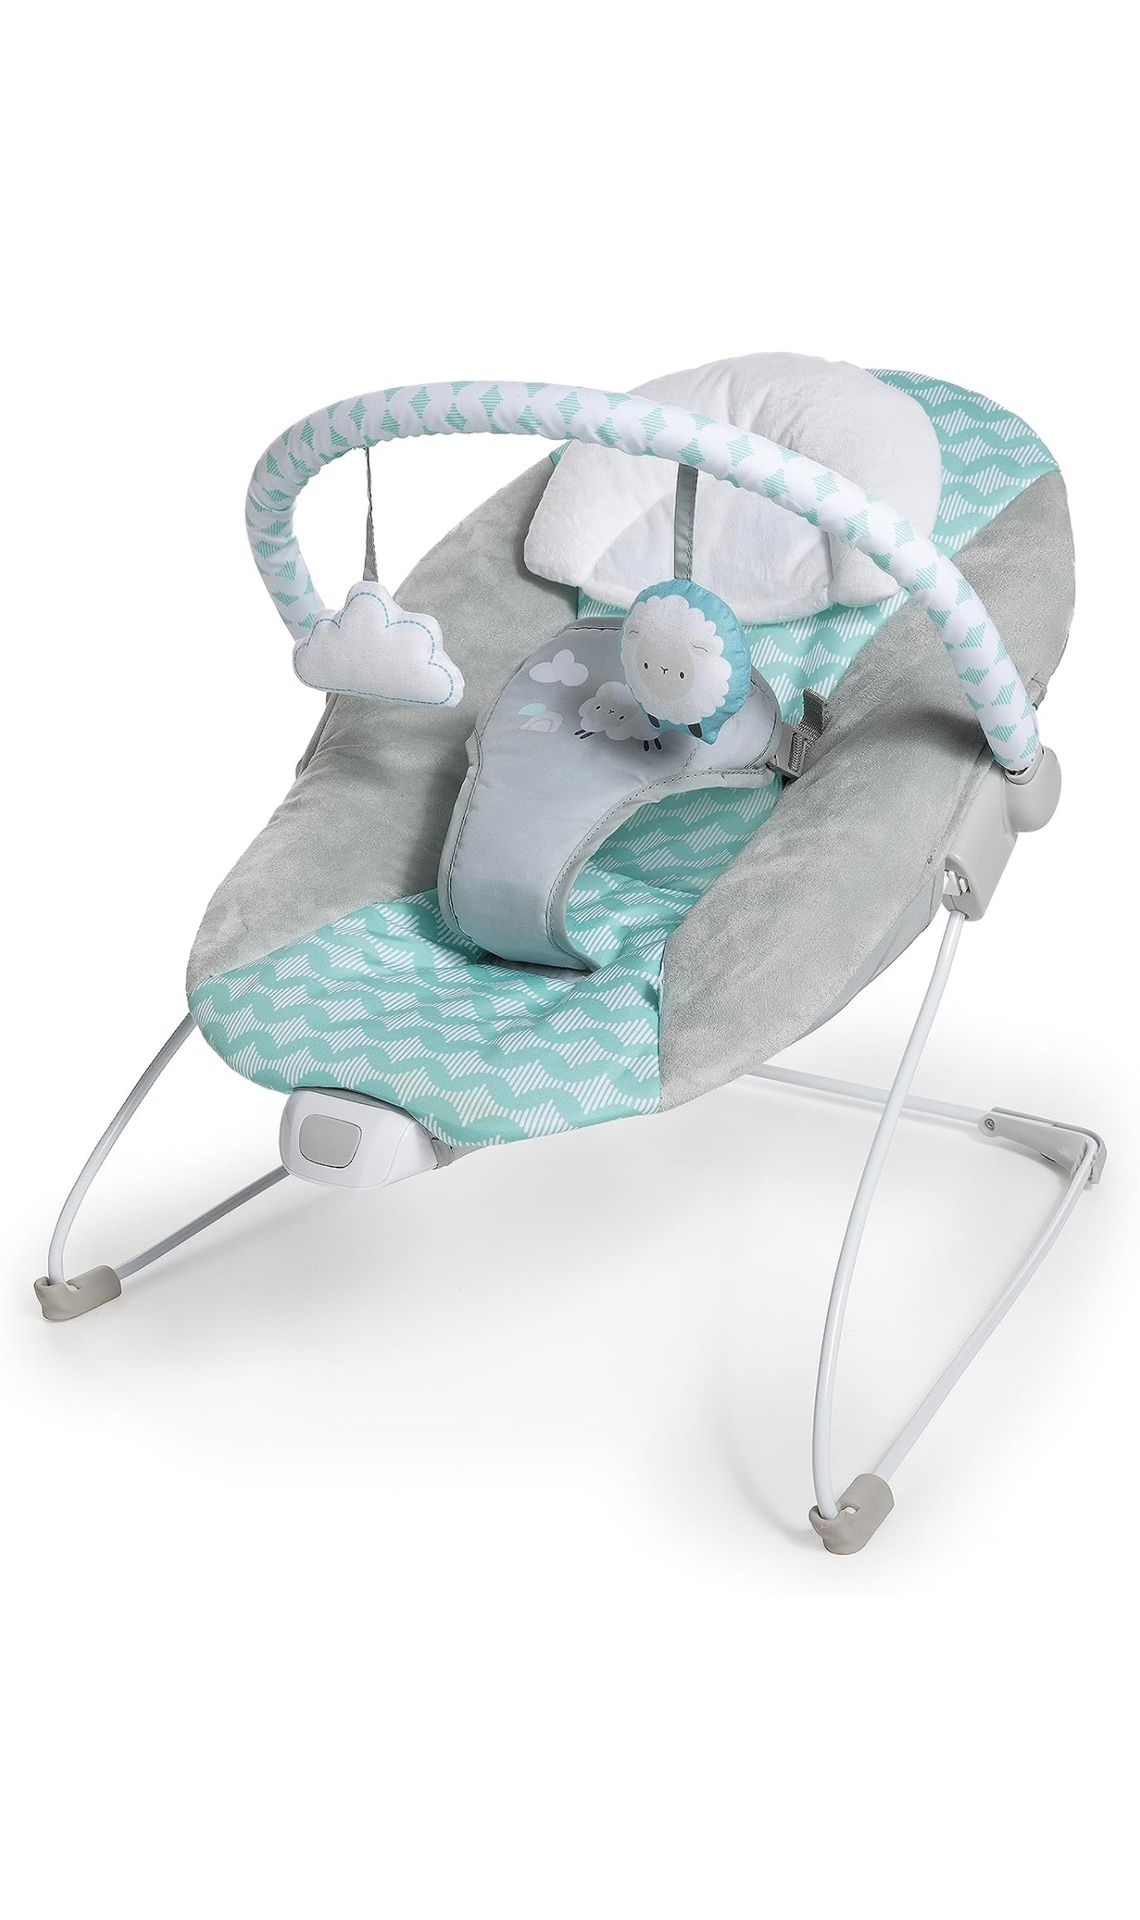 Ingenuity Ity Bouncity Bounce Vibrating Deluxe Baby Bouncer Seat, 0-6 Months Up to 20 lbs